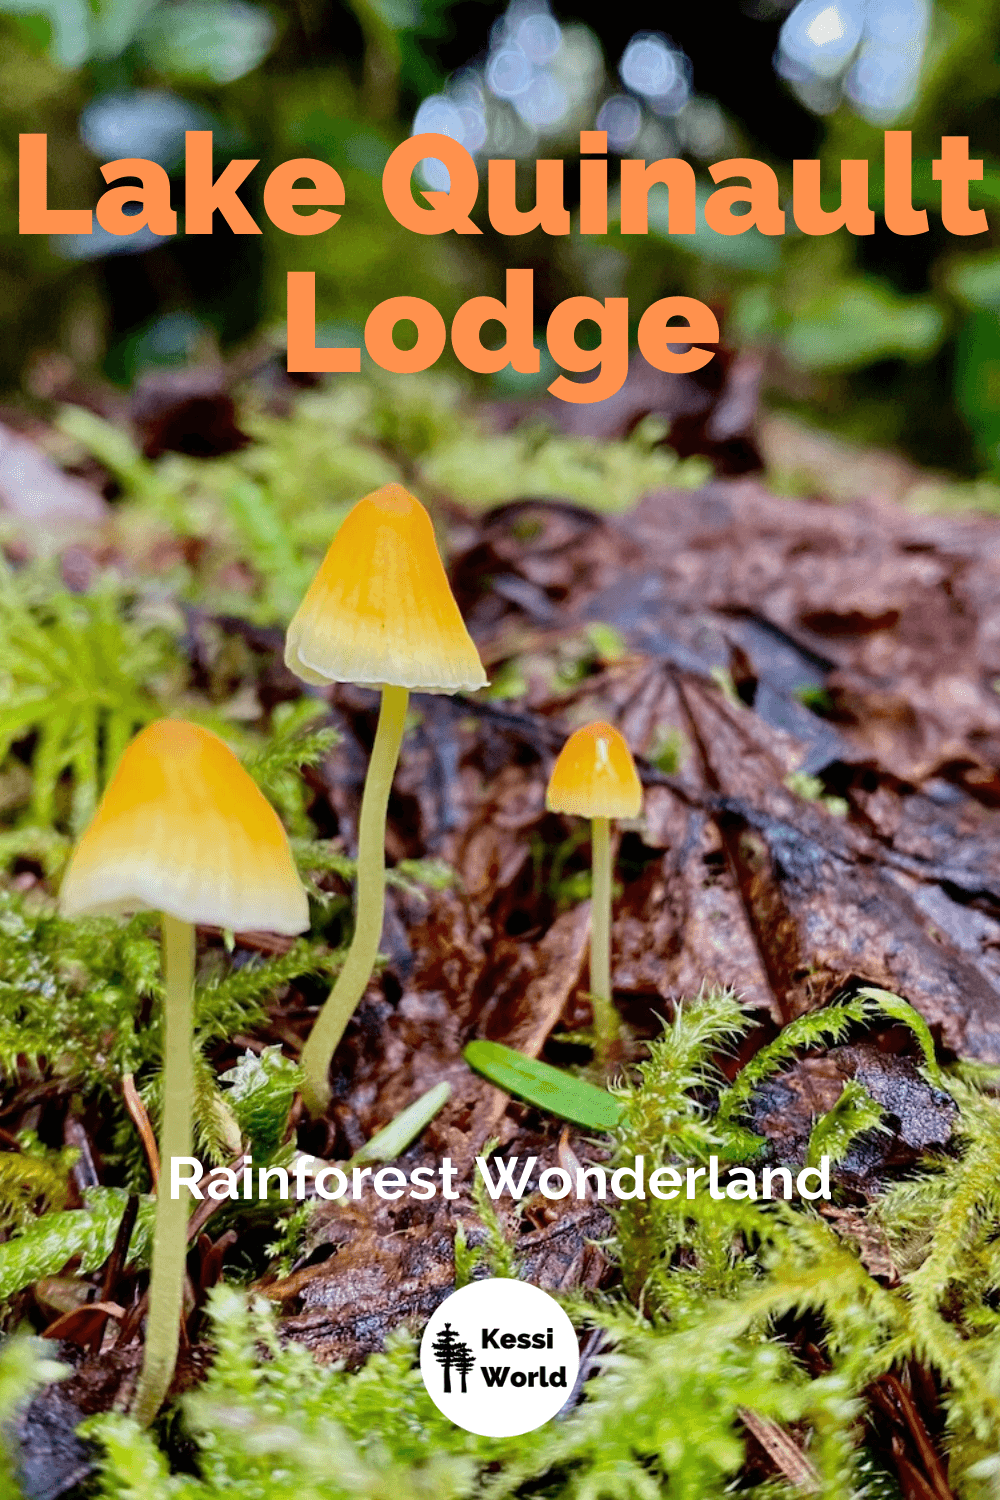 This is an up close view of three delicate mushrooms with orange caps. They are popping up from a leaf and moss covered wood branch imbedded on the forest floor.